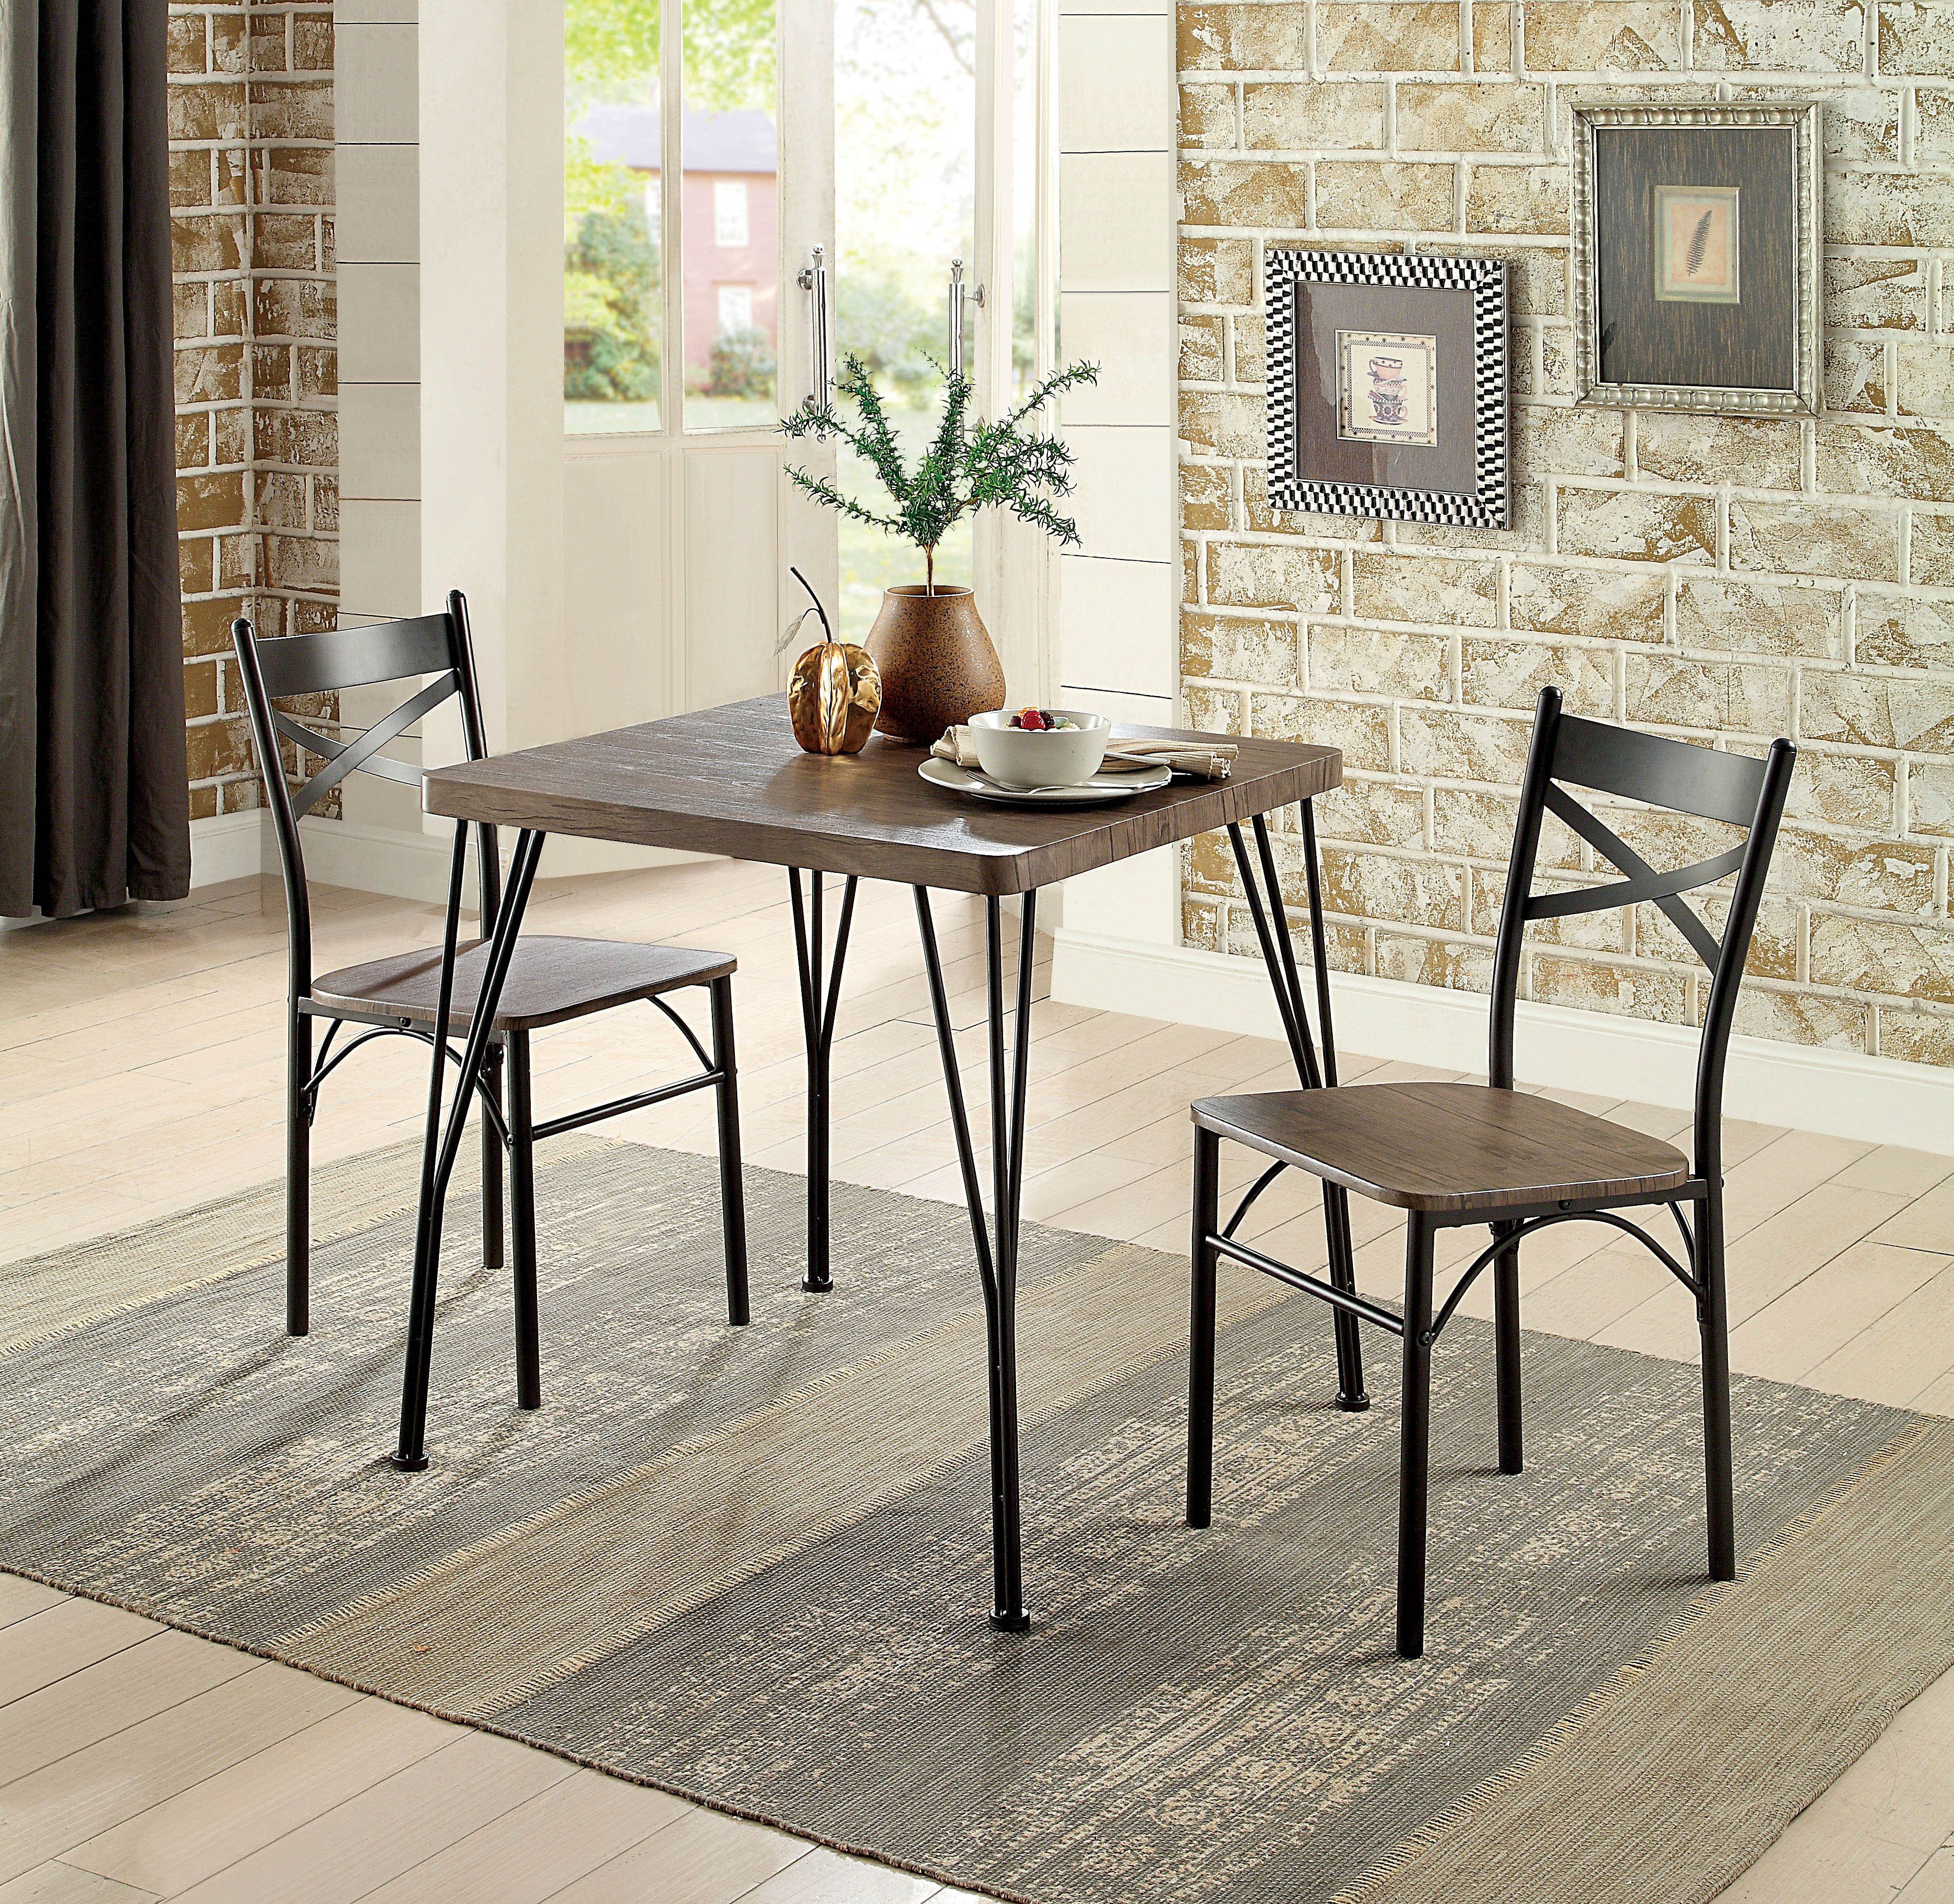 Guertin 3 Piece Dining Set Pertaining To Most Current Bearden 3 Piece Dining Sets (View 5 of 20)